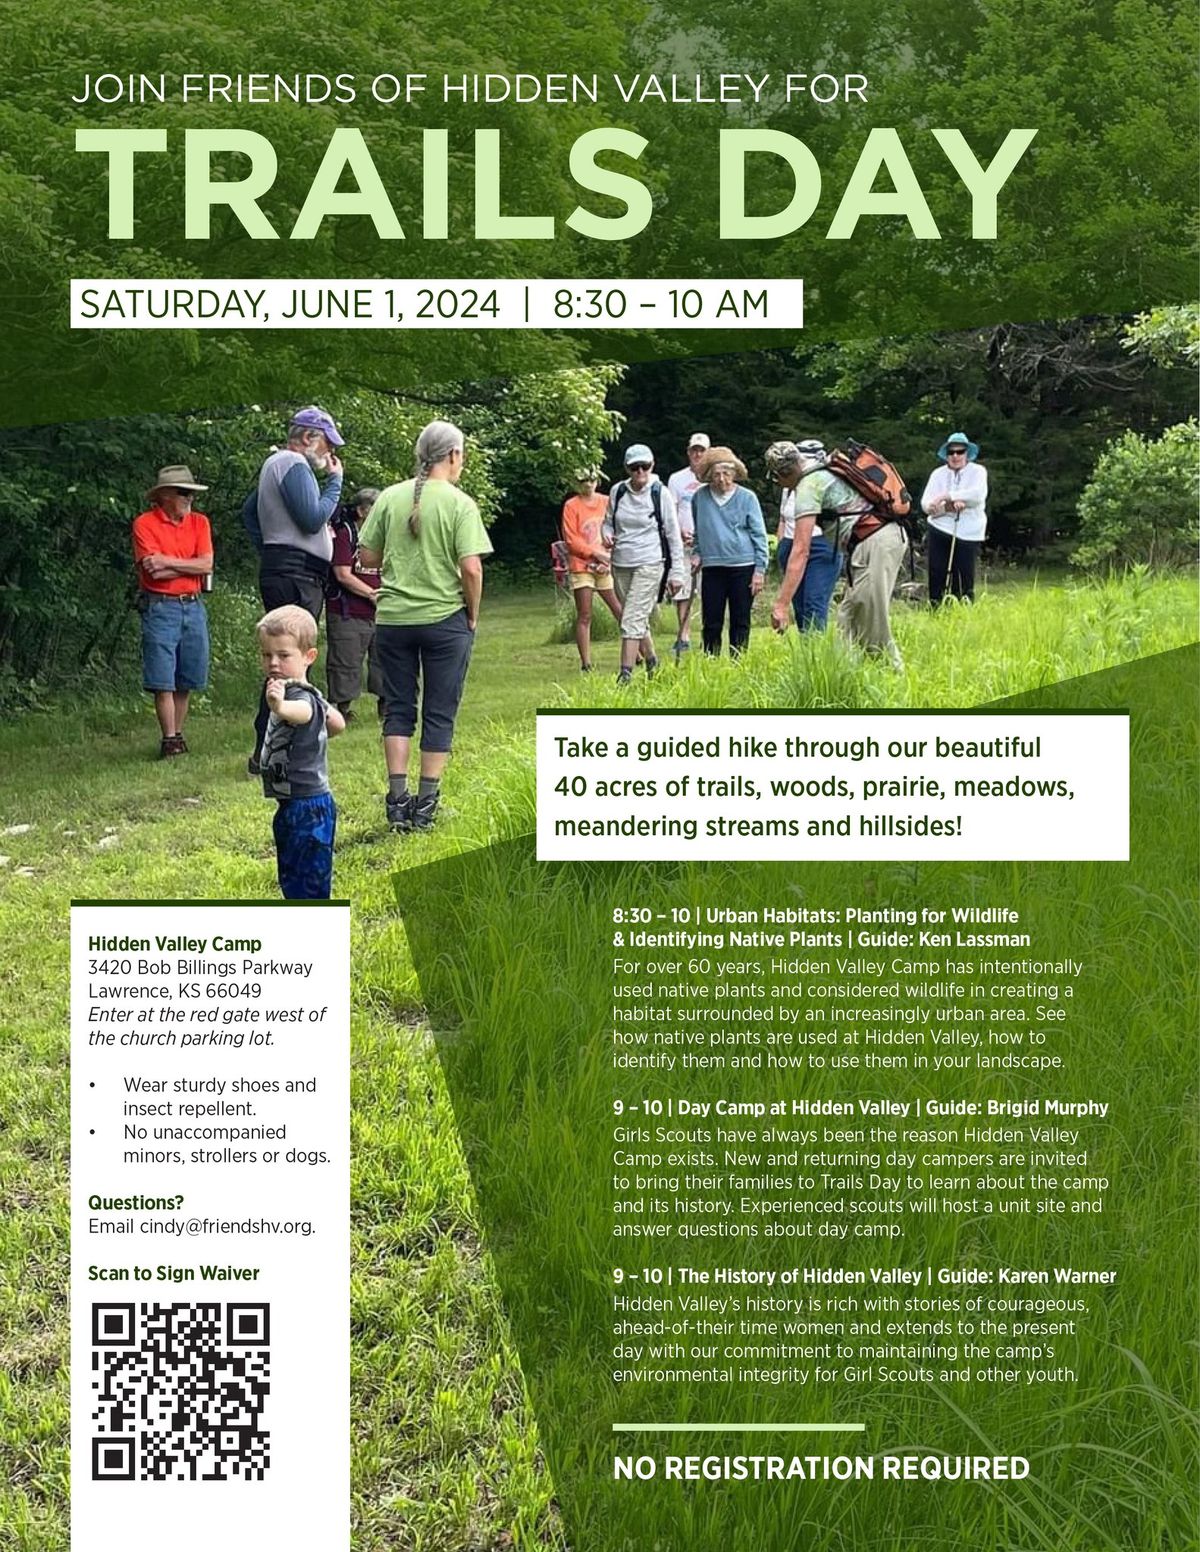 Friends of Hidden Valley National Trails Day